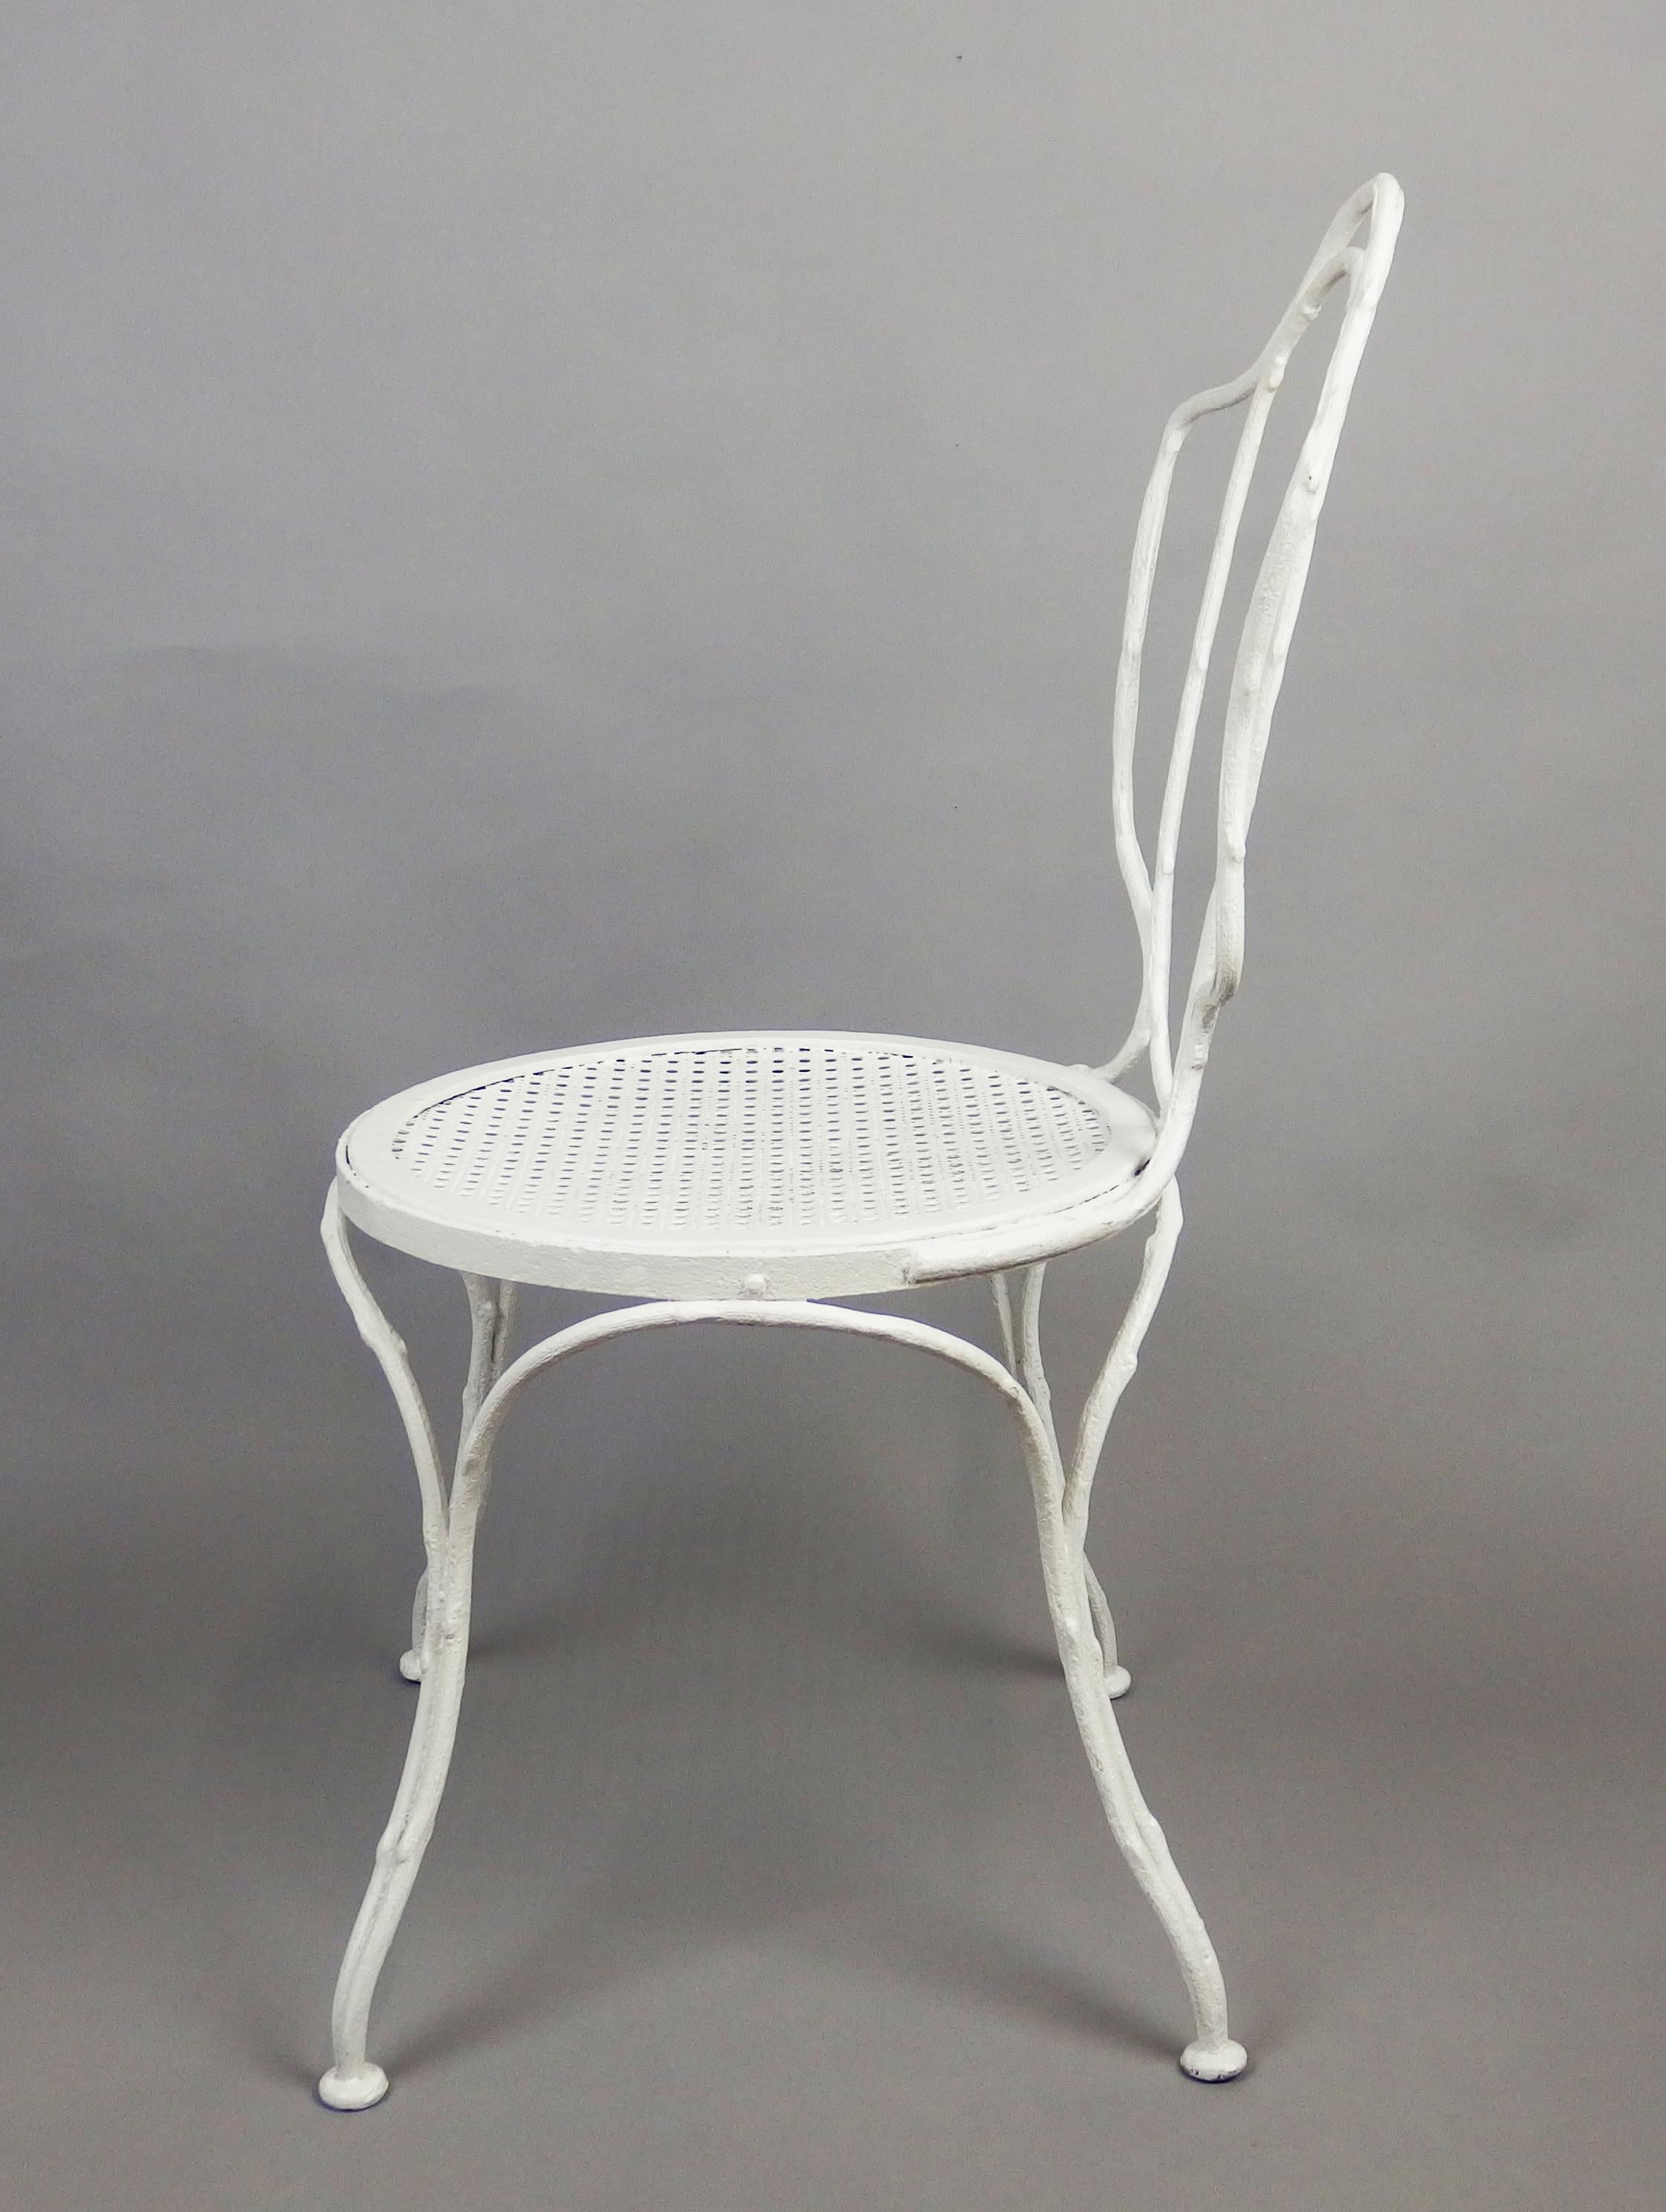 A tree branches shaped, white enameled garden chair manufactured by 